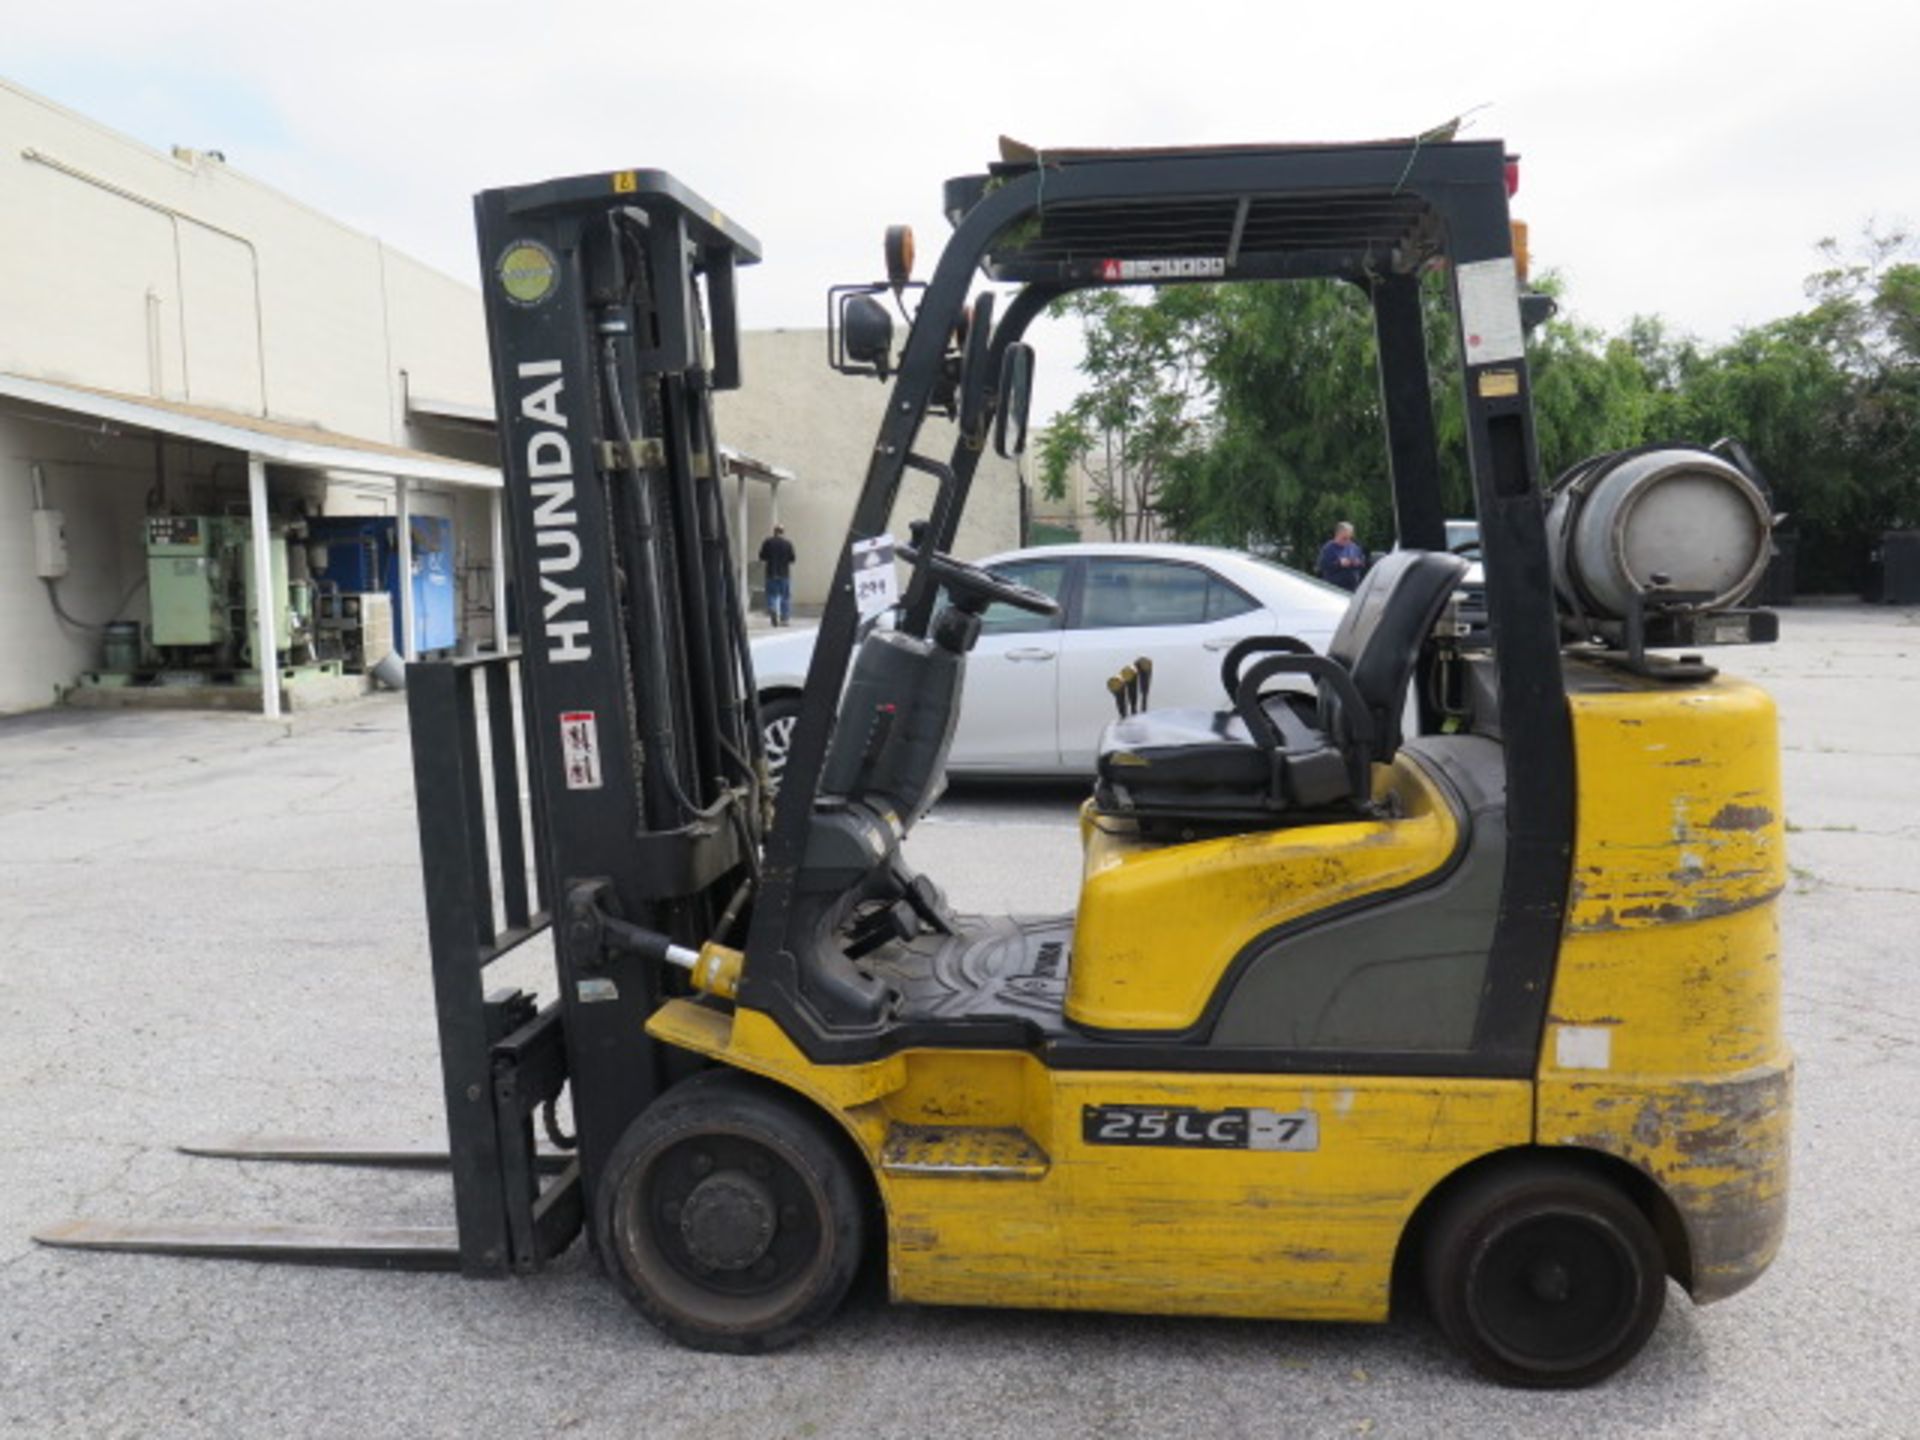 Hyundai 25LC-7 4680 Lb LPG Forklift s/n HC0210054 w/ 3-Stage, 185” Lift, Side Shift, SOLD AS IS